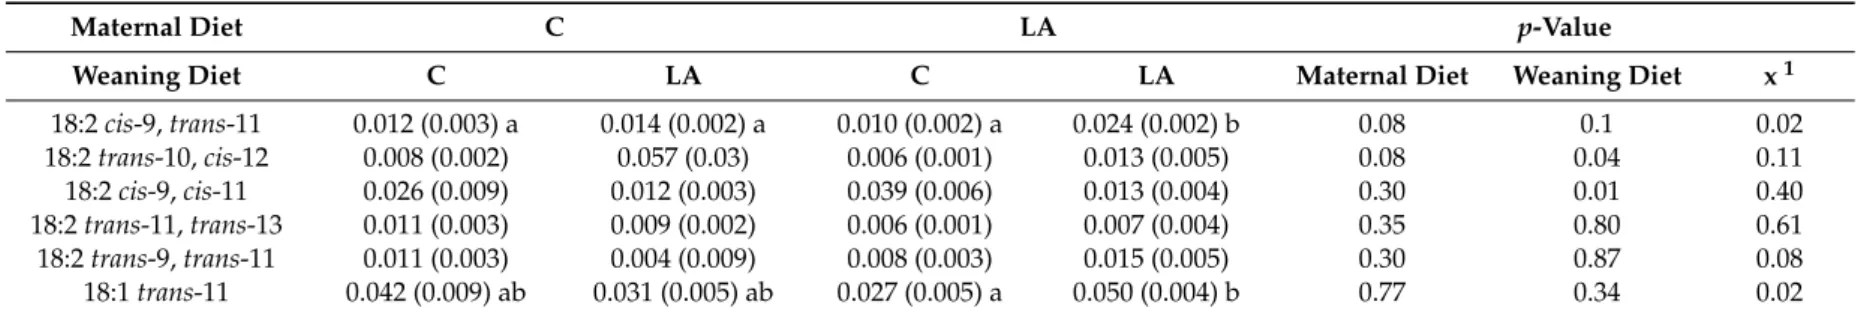 Table 2. Hepatic conjugated linoleic acid concentrations at 3 months of age.